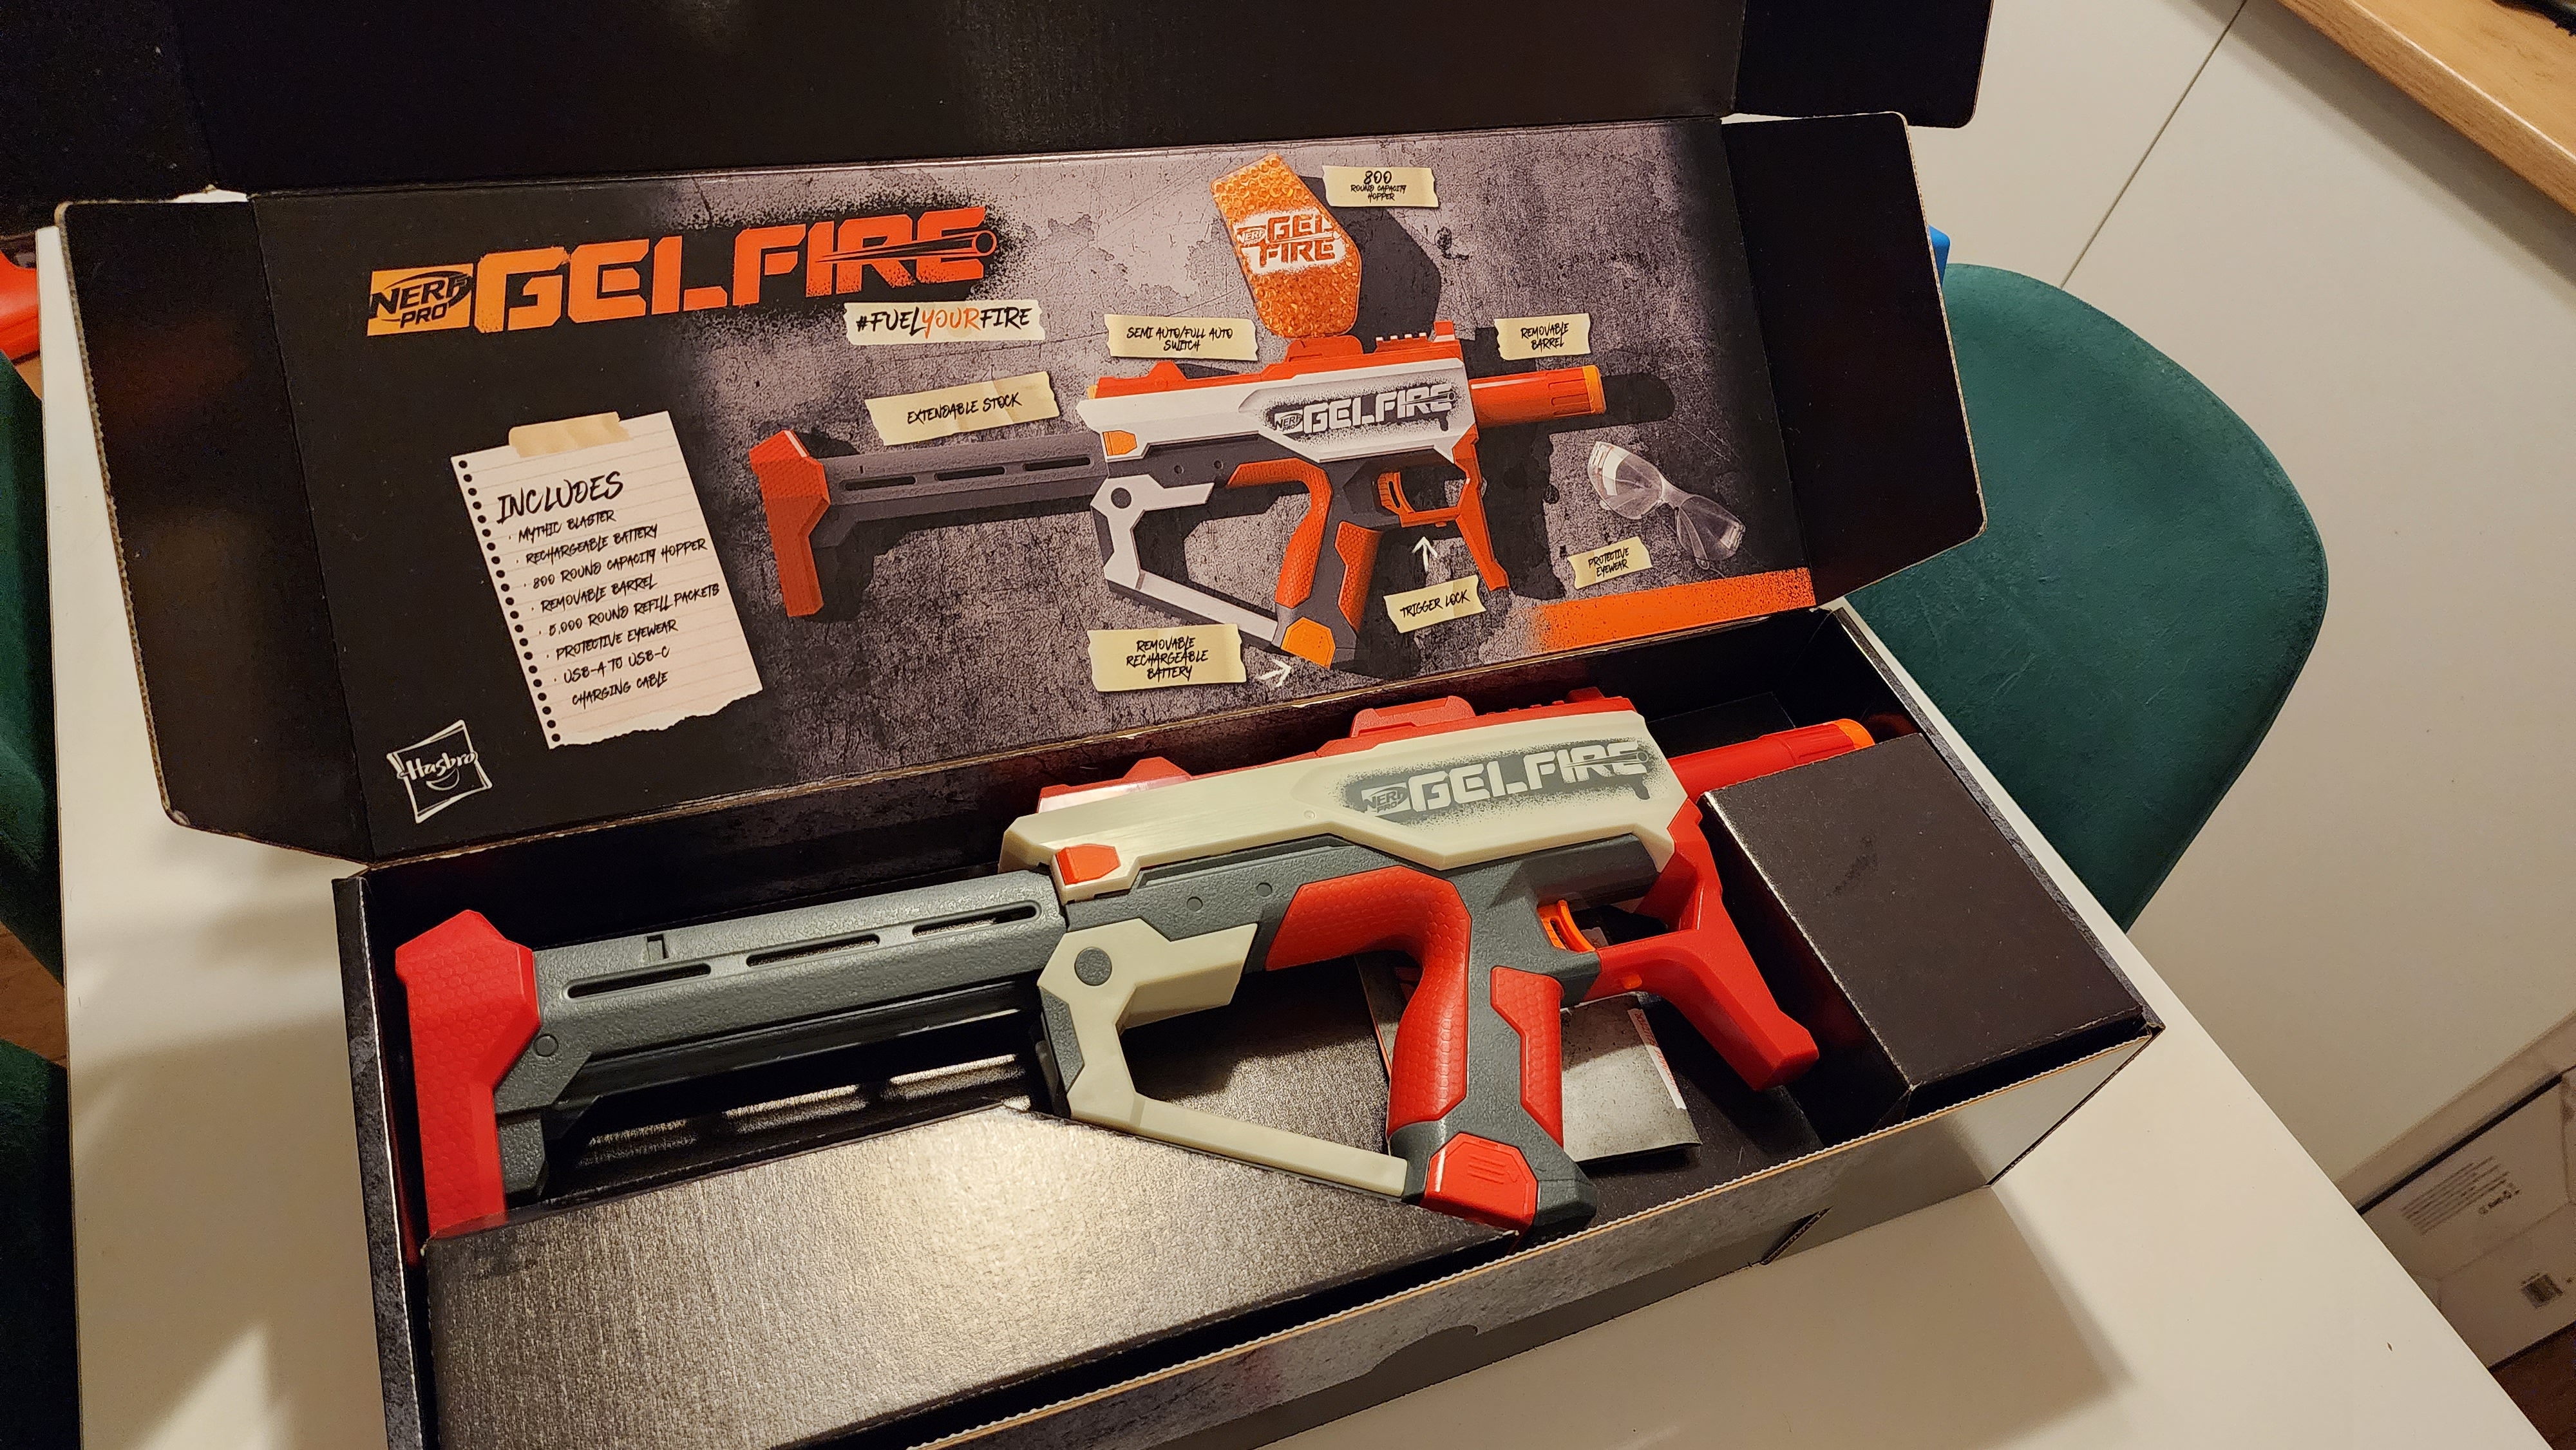 Alleged pic of new Rival blaster : r/Nerf